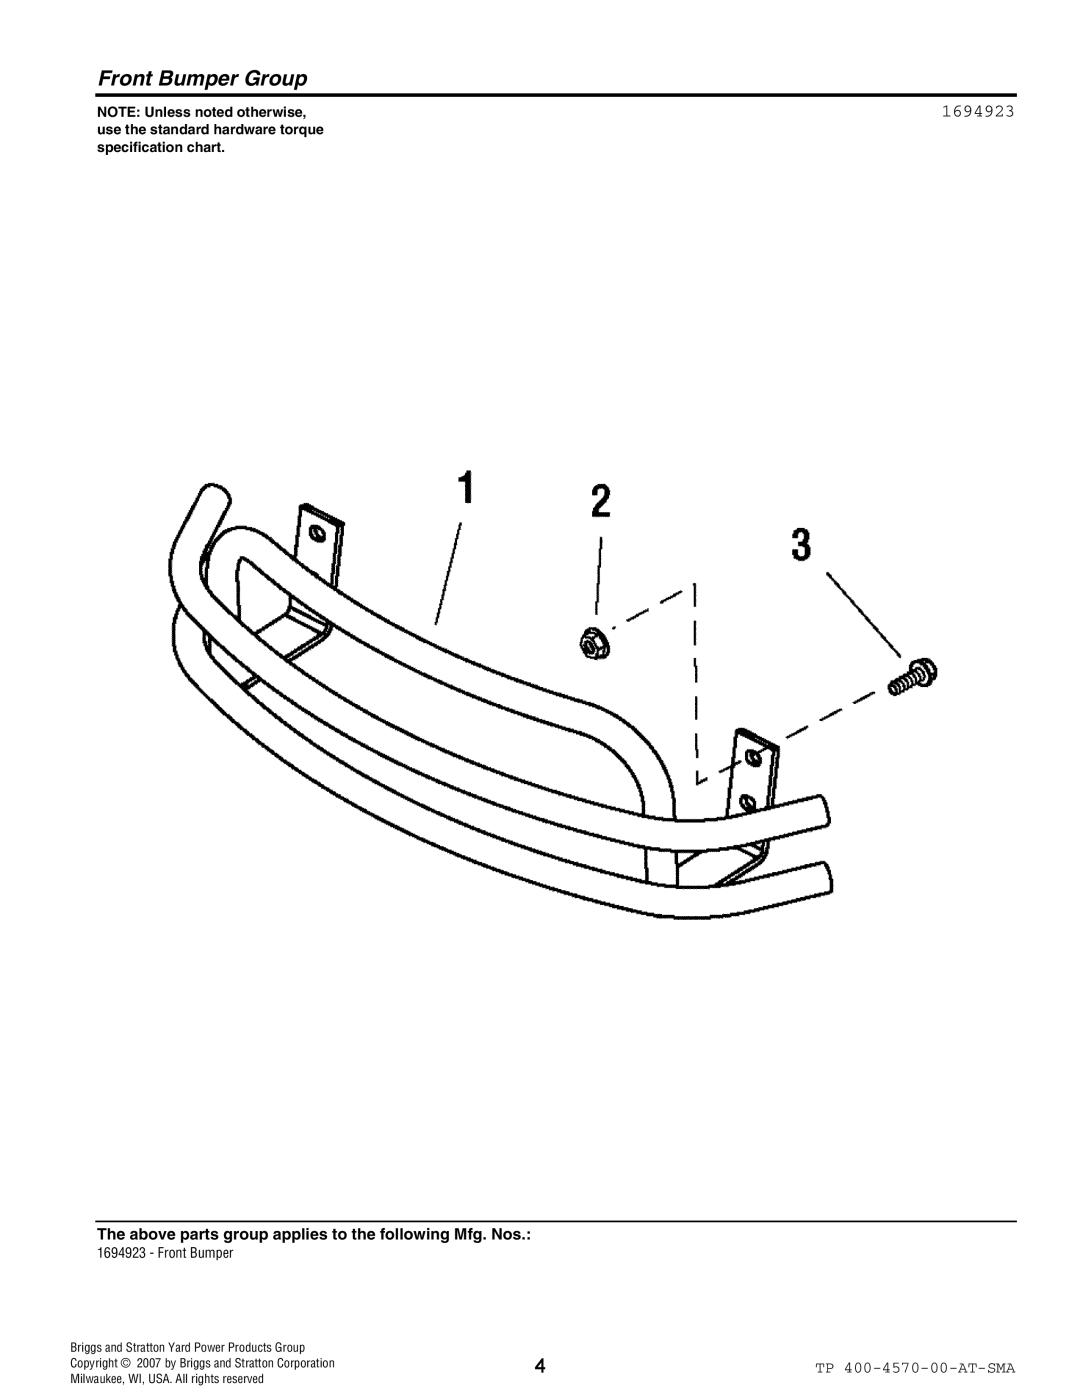 Snapper 4570 manual Front Bumper Group, 1694923, NOTE Unless noted otherwise, Briggs and Stratton Yard Power Products Group 